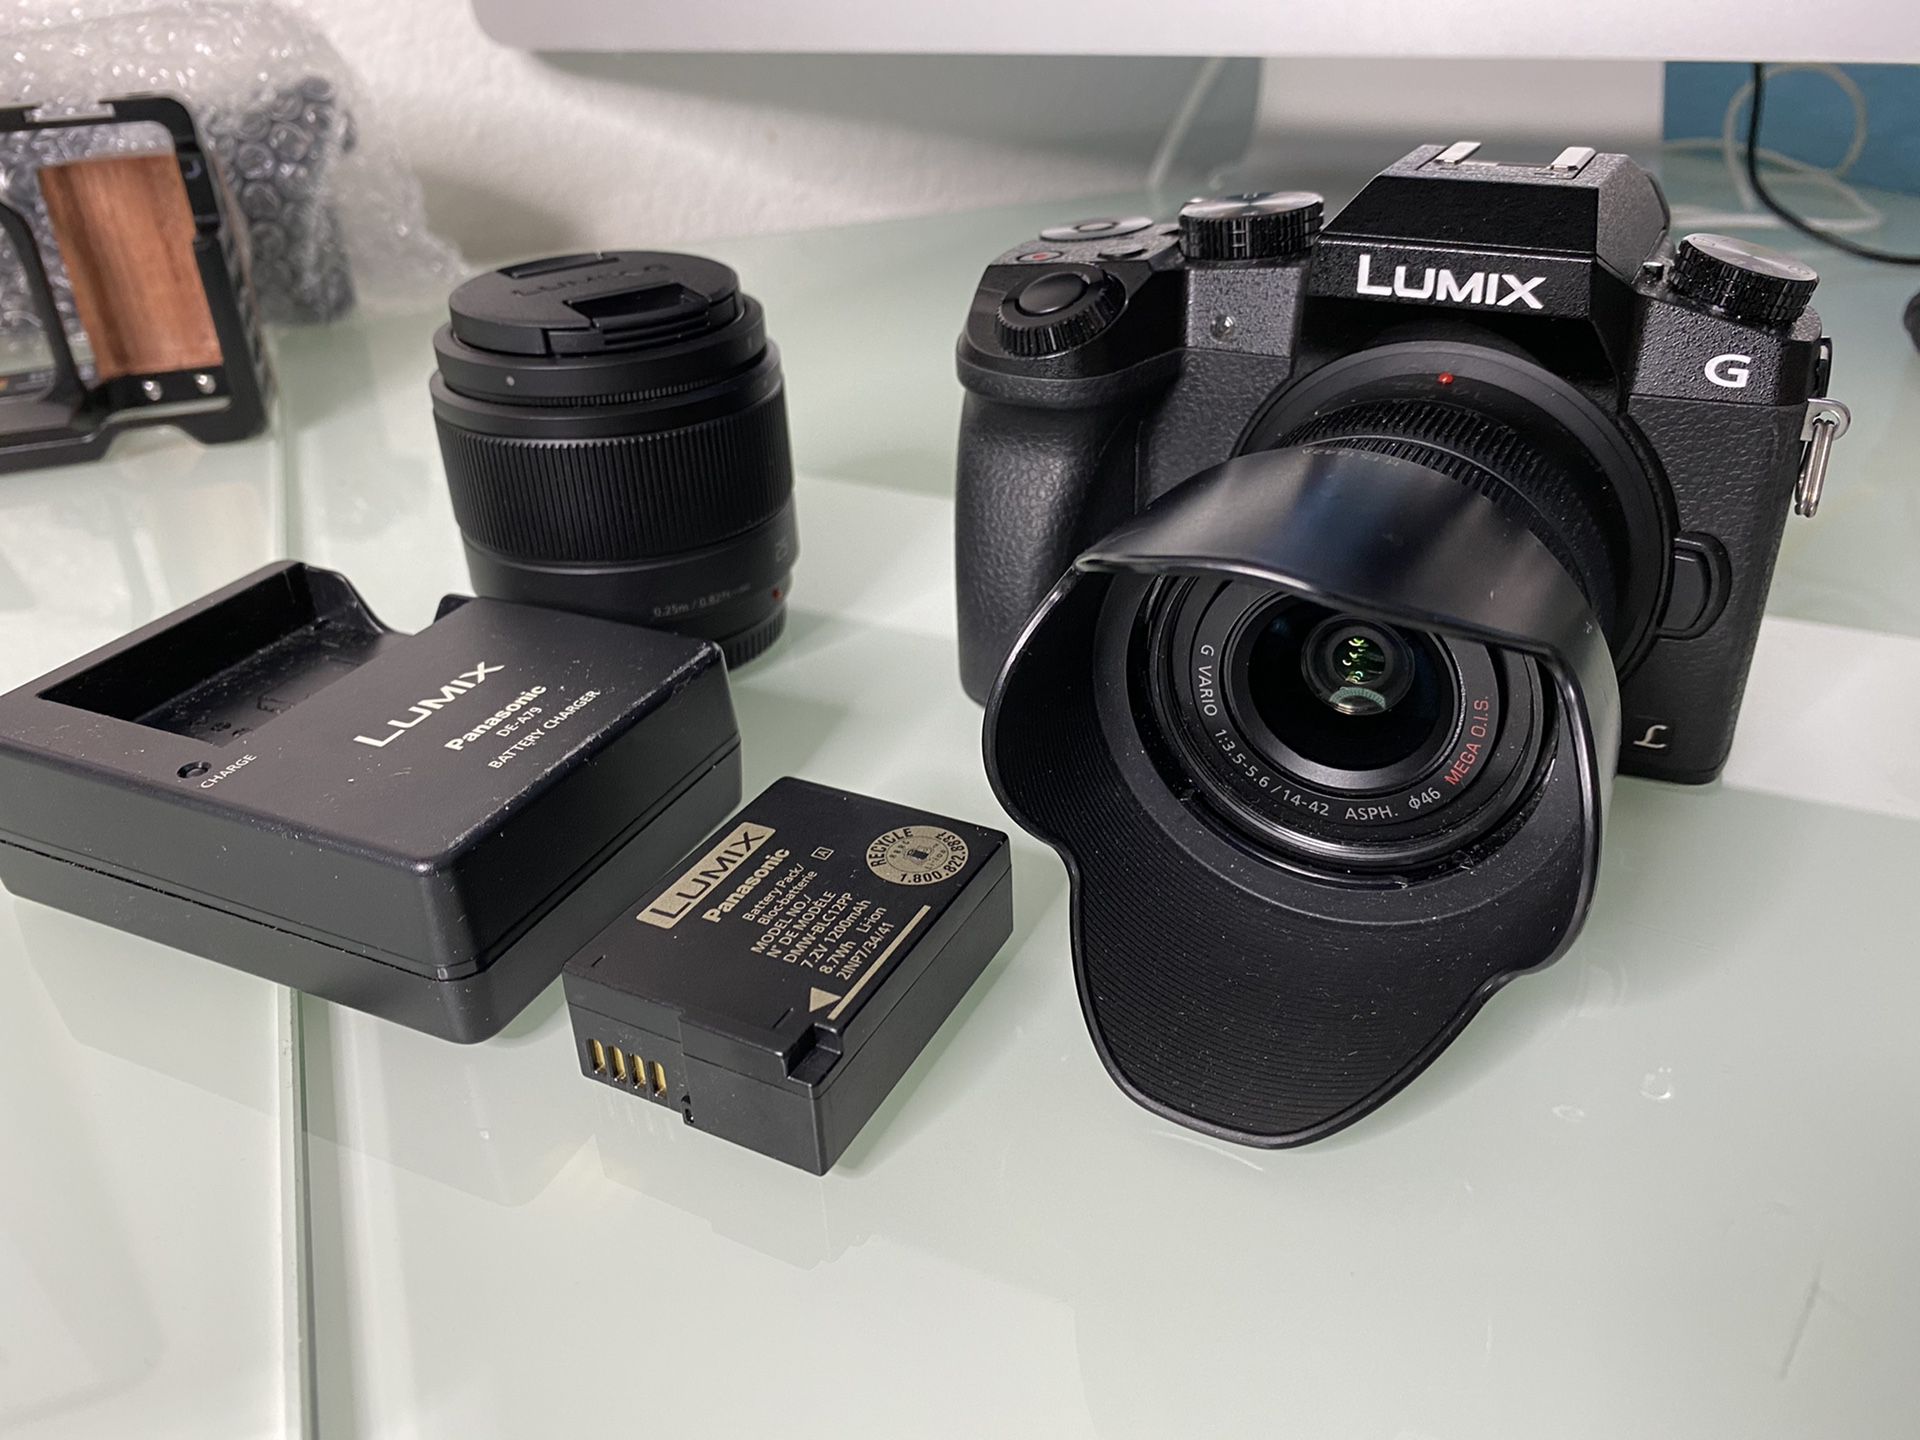 Panasonic Lumix G7 with 14-42mm only 42 shutter count